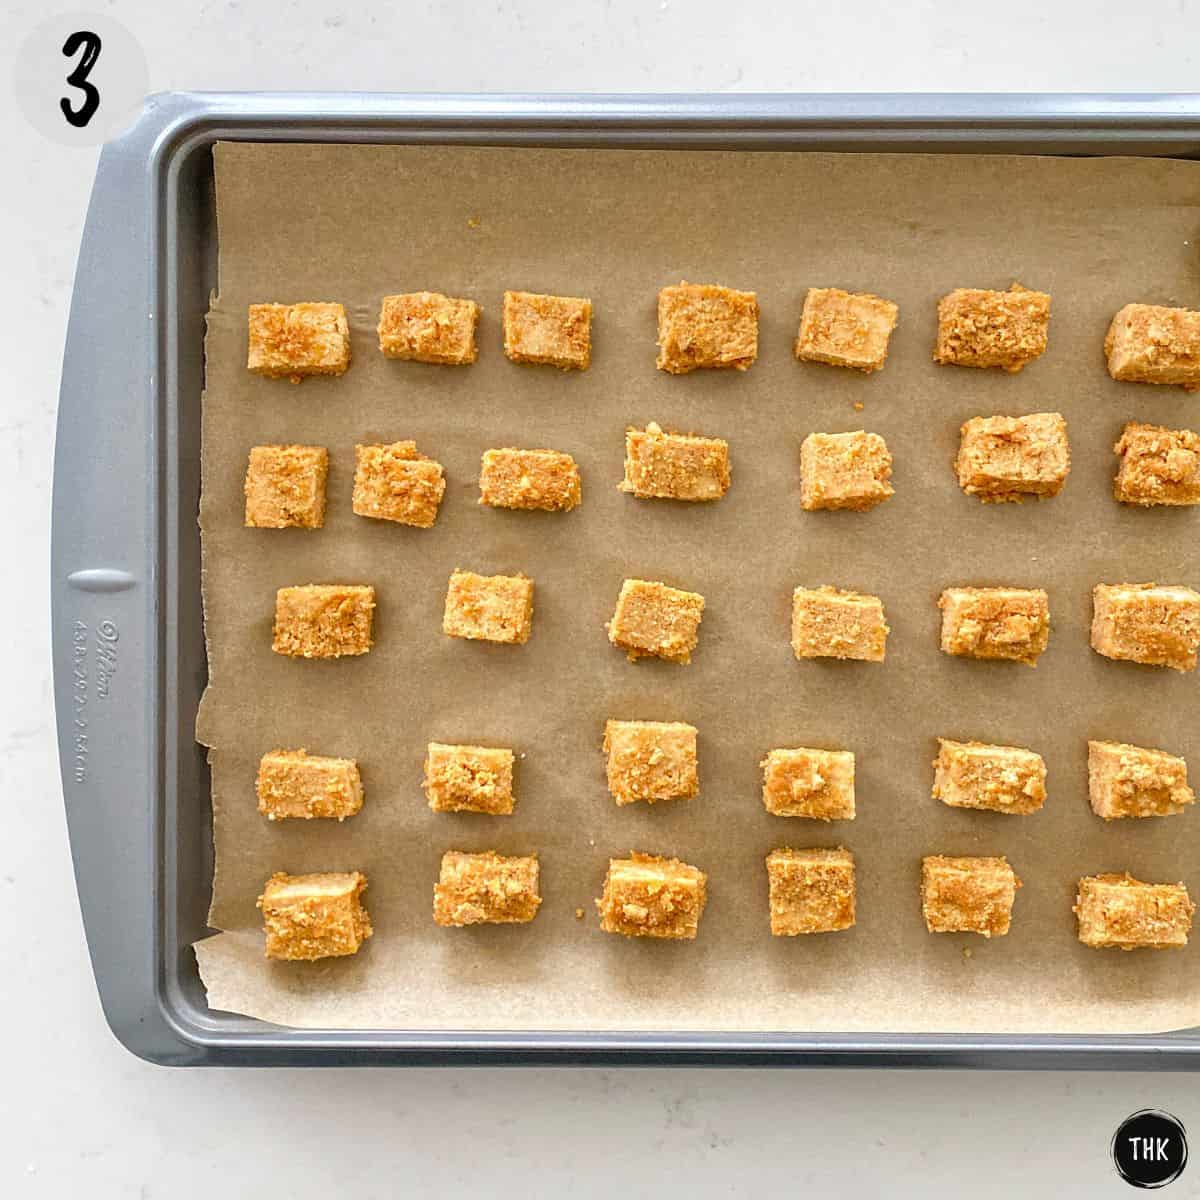 Tofu cubes on baking sheet lined with parchment paper before baking.